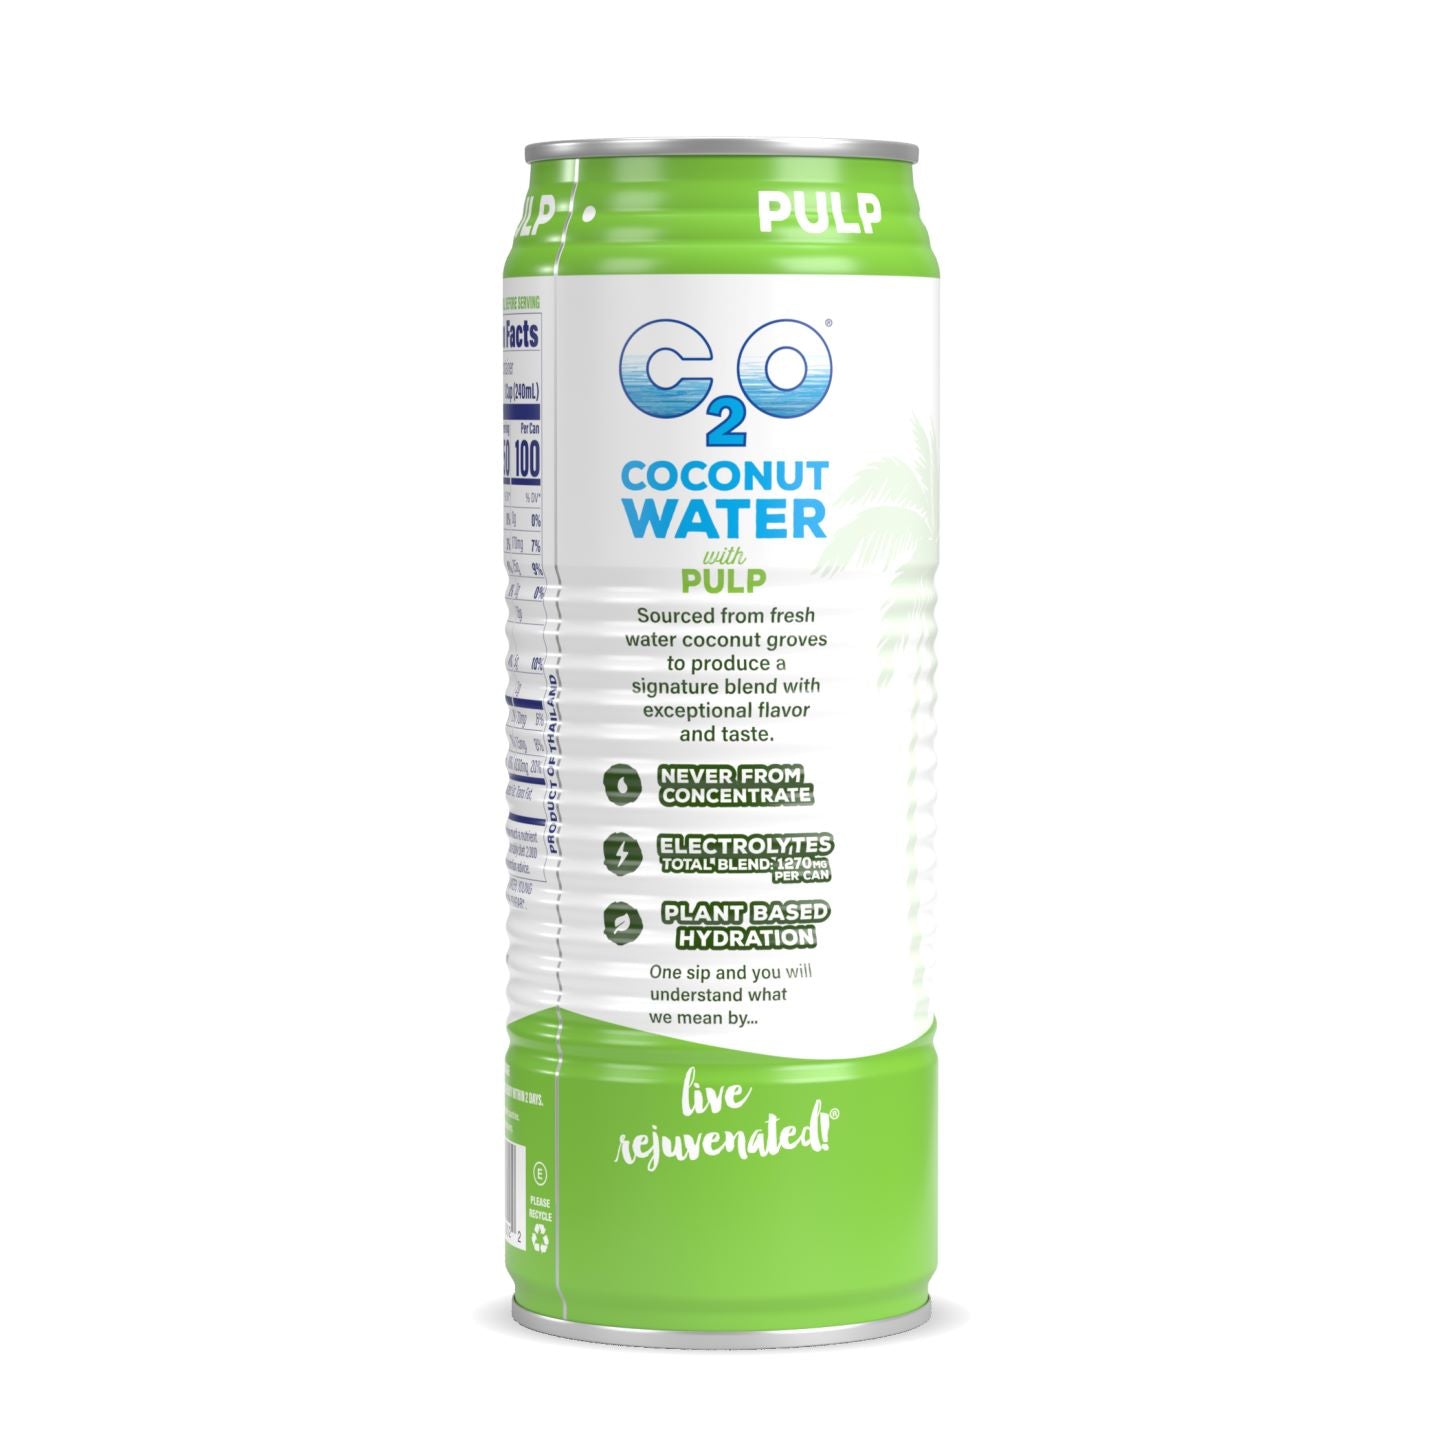 Coconut Water with Pulp - 17.5 fl oz. (Pack of 12)